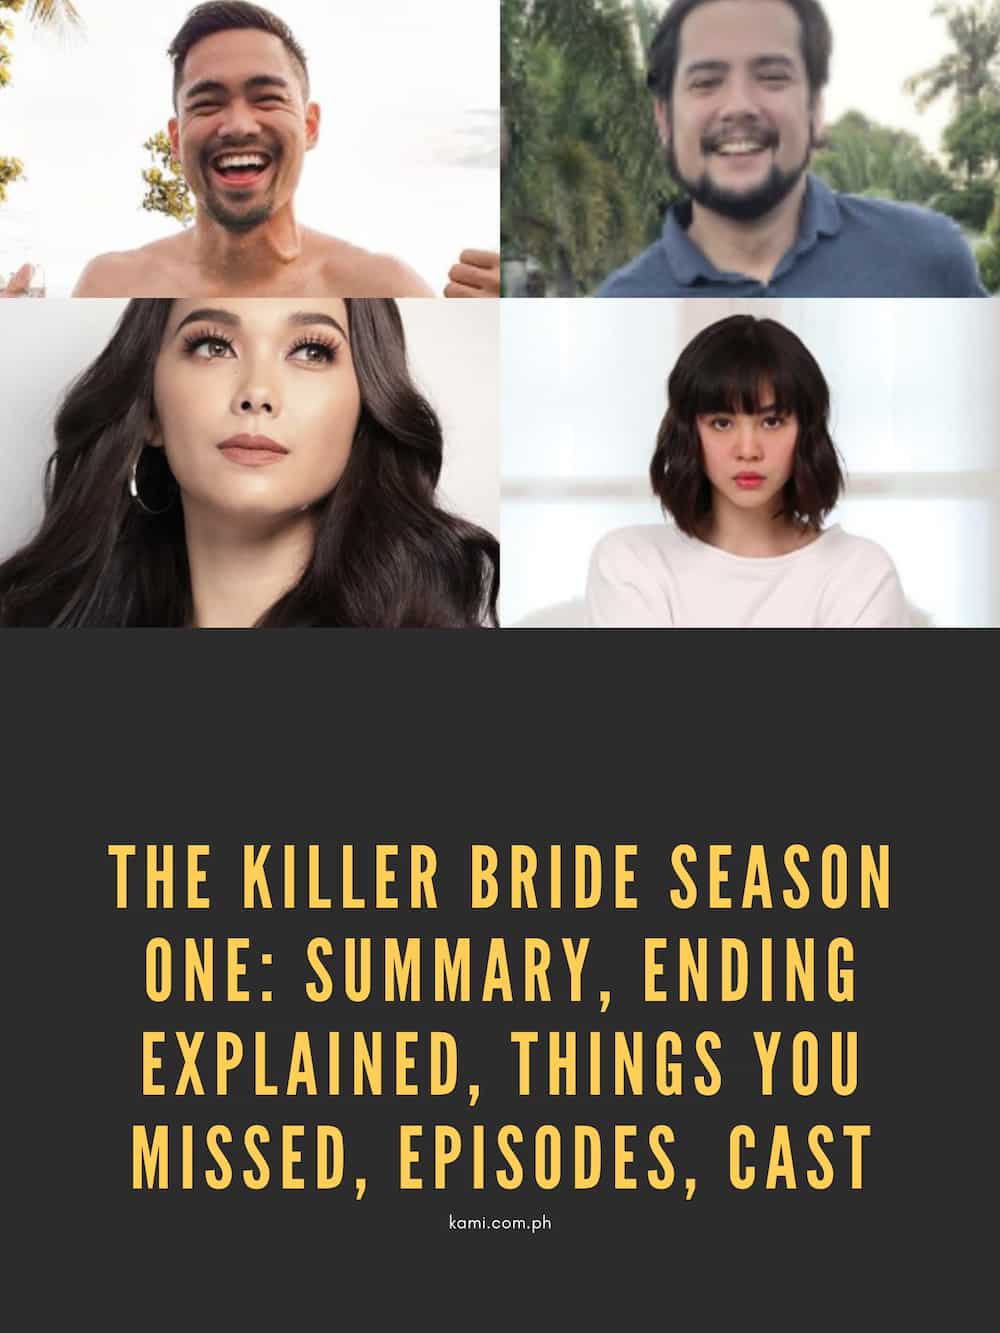 The Killer Bride season one: summary, ending explained, things you missed, episodes, cast